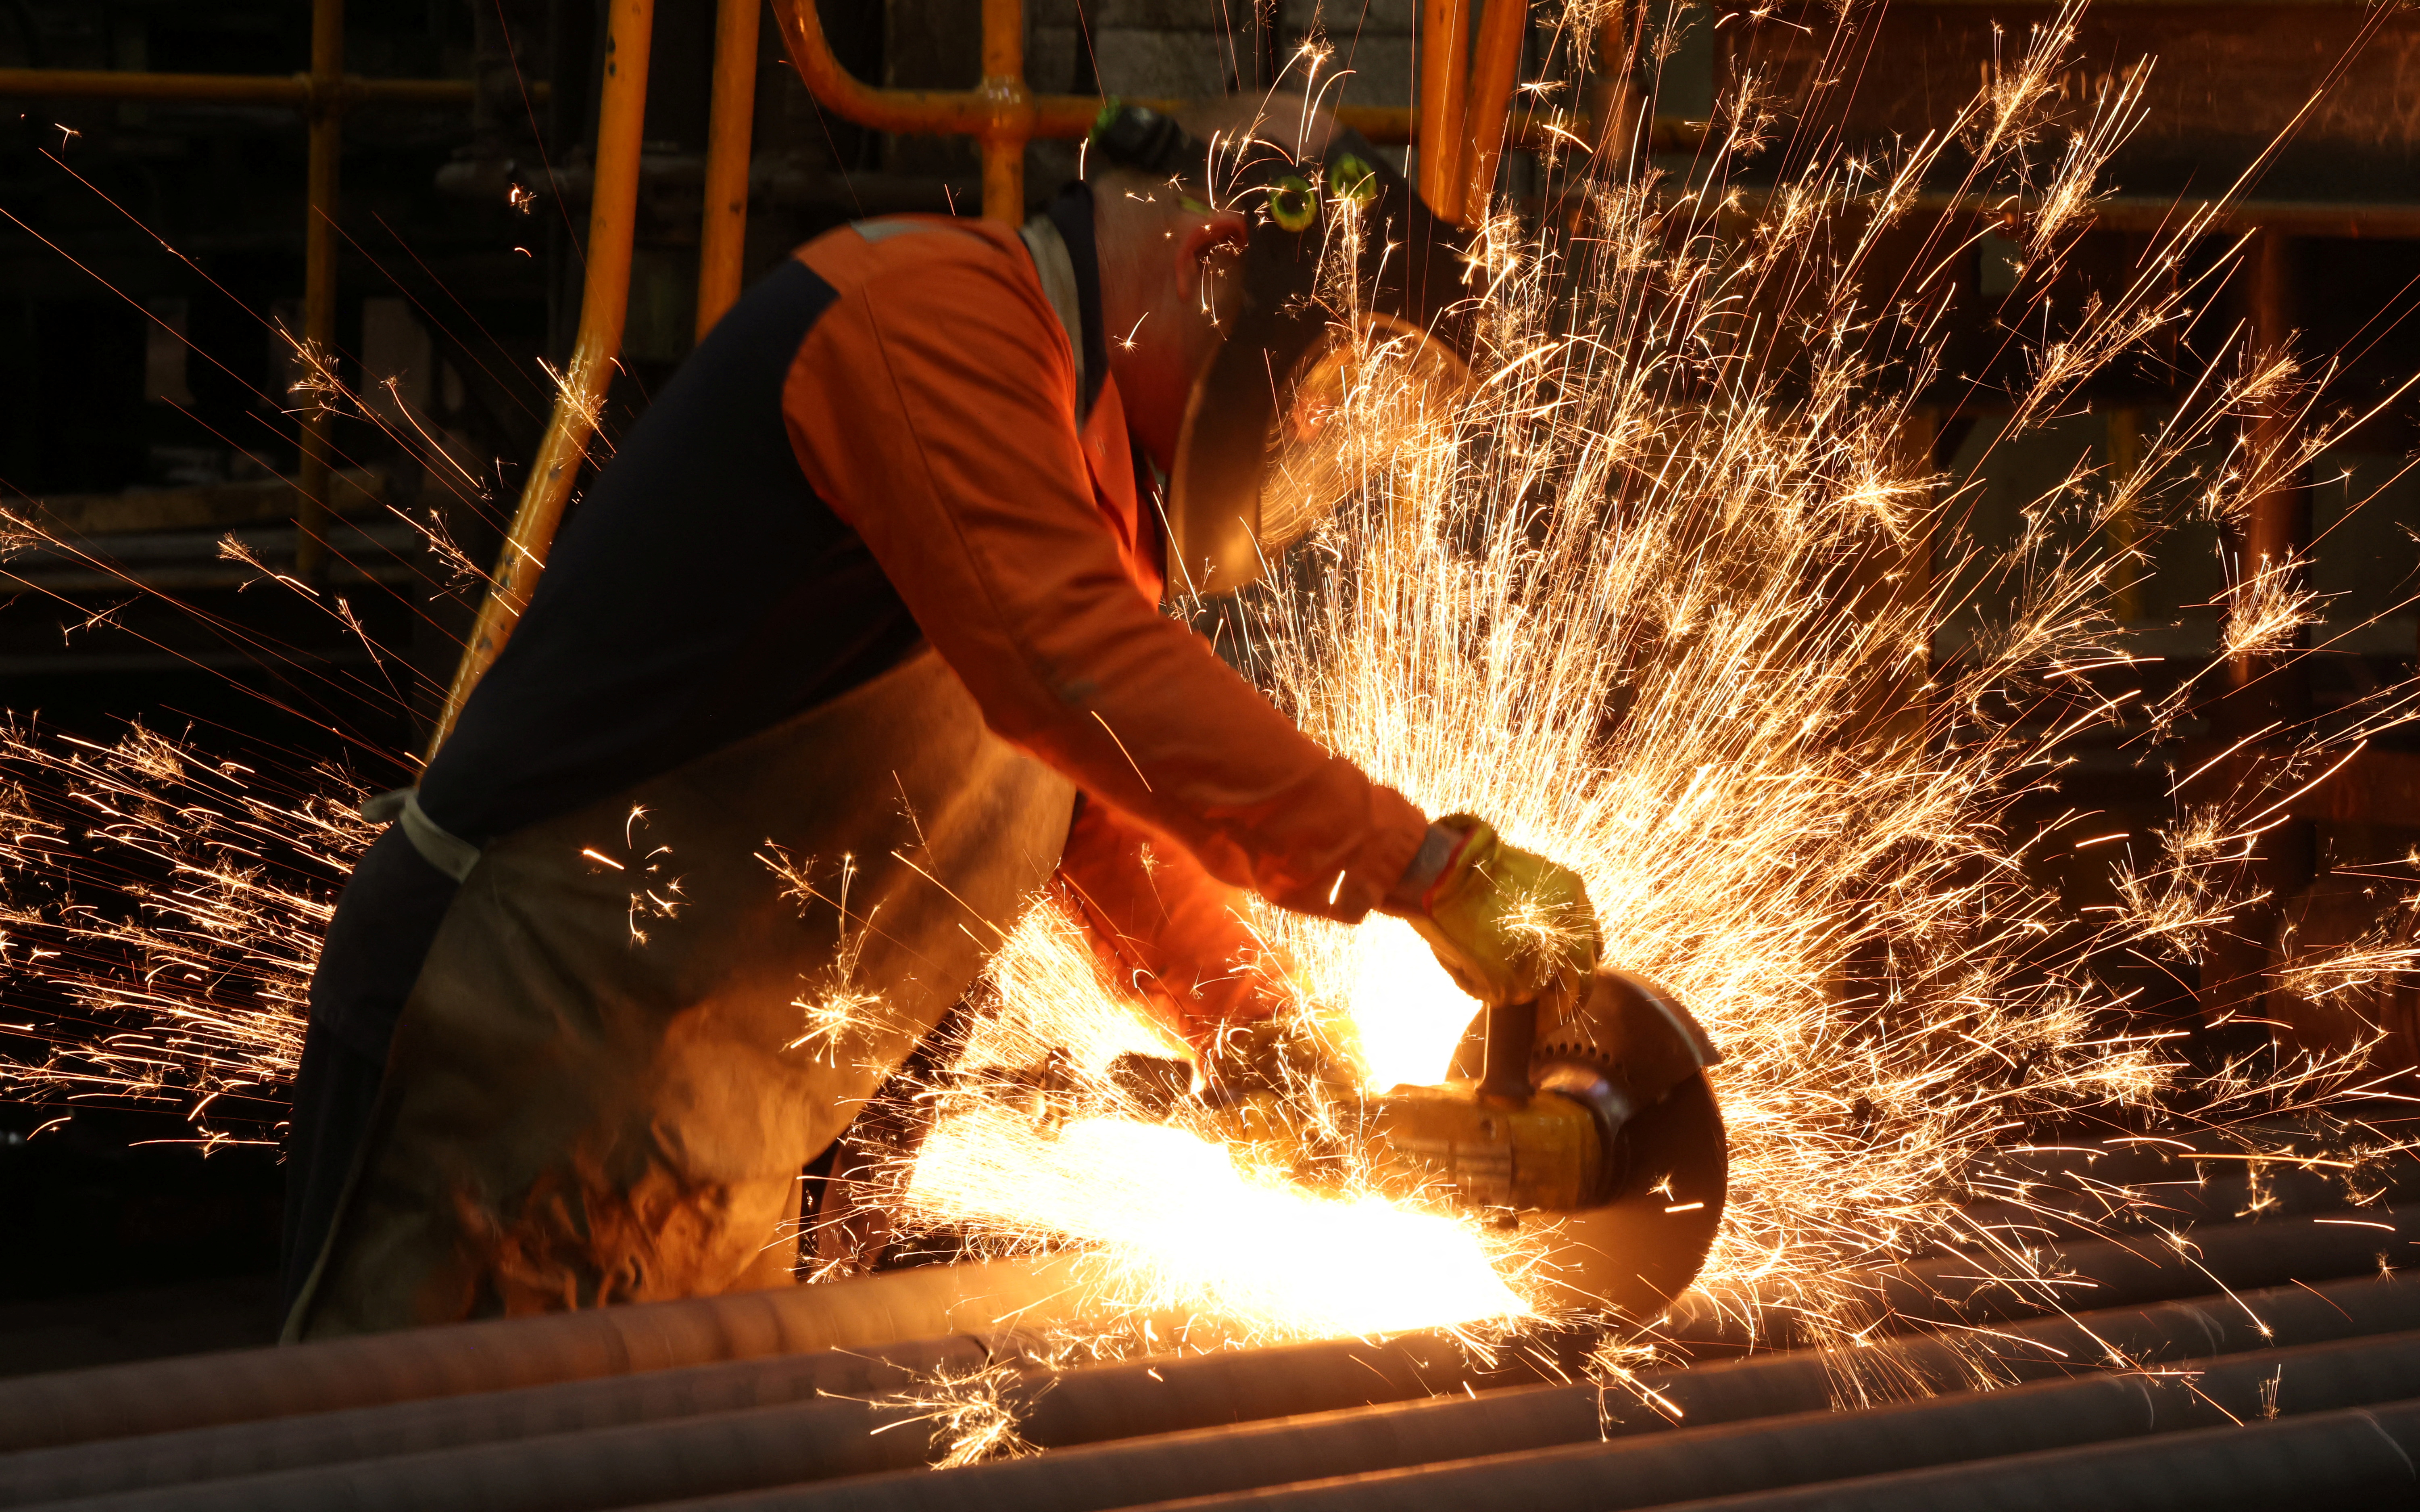 A worker cuts newly manufactured bars of steel at the United Cast Bar Group's foundry in Chesterfield